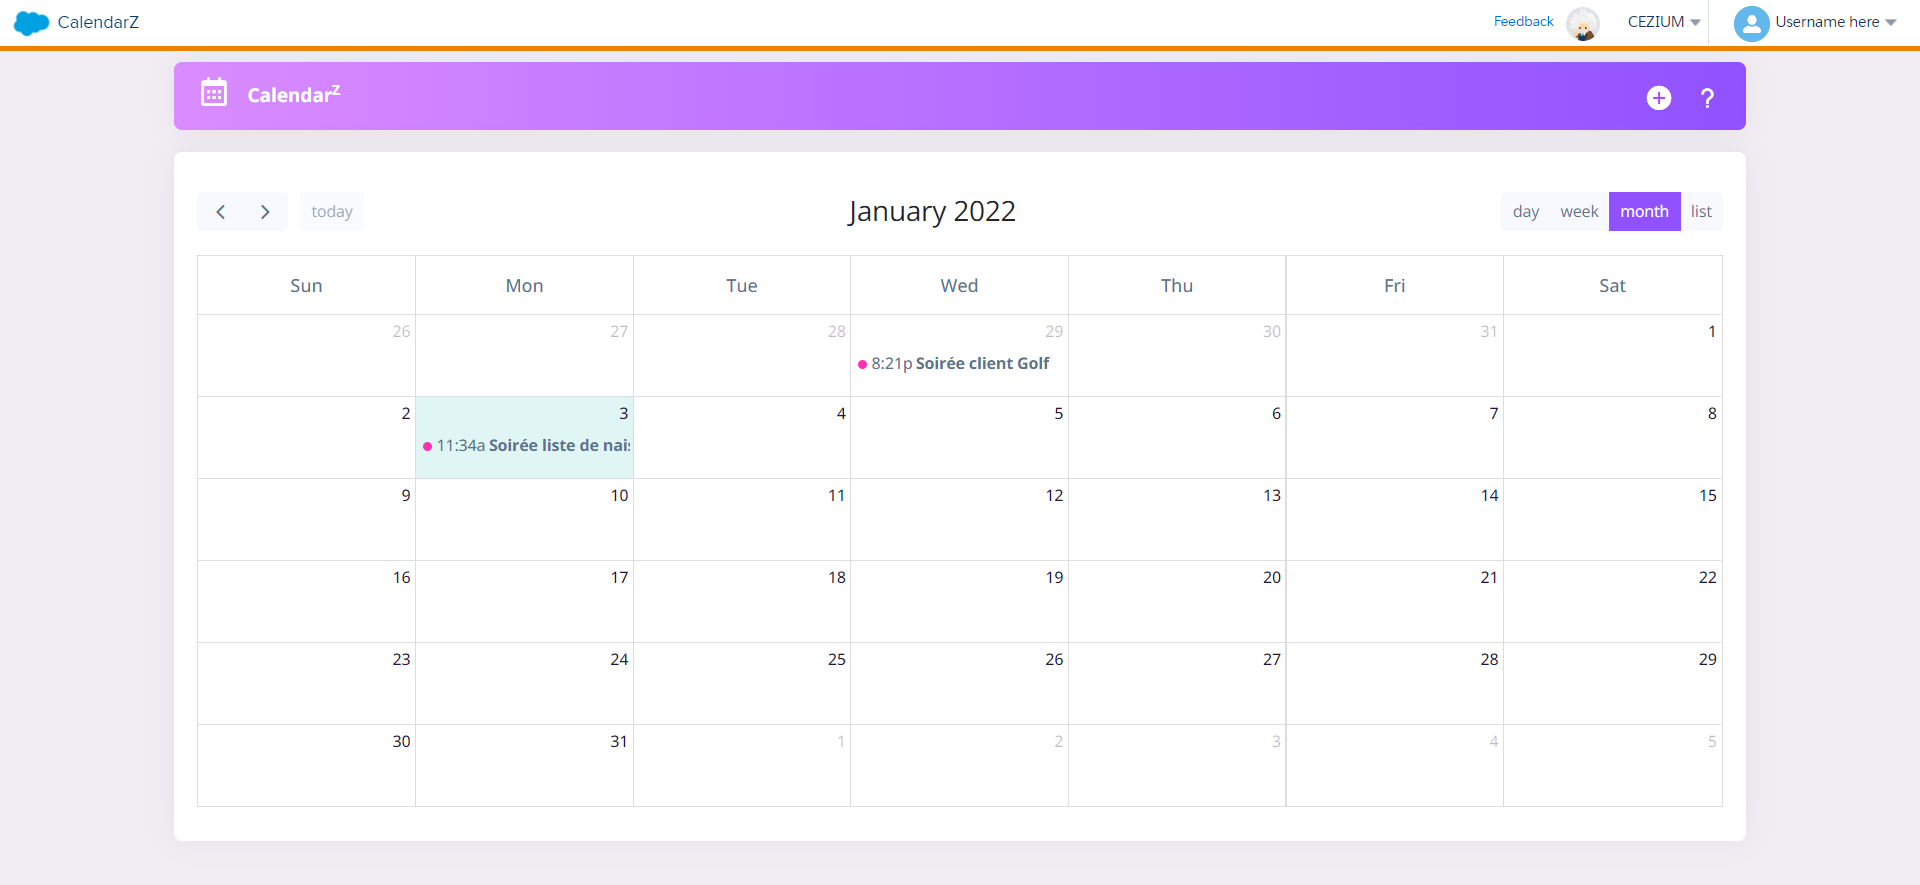 See all the public events created in CalendarZ